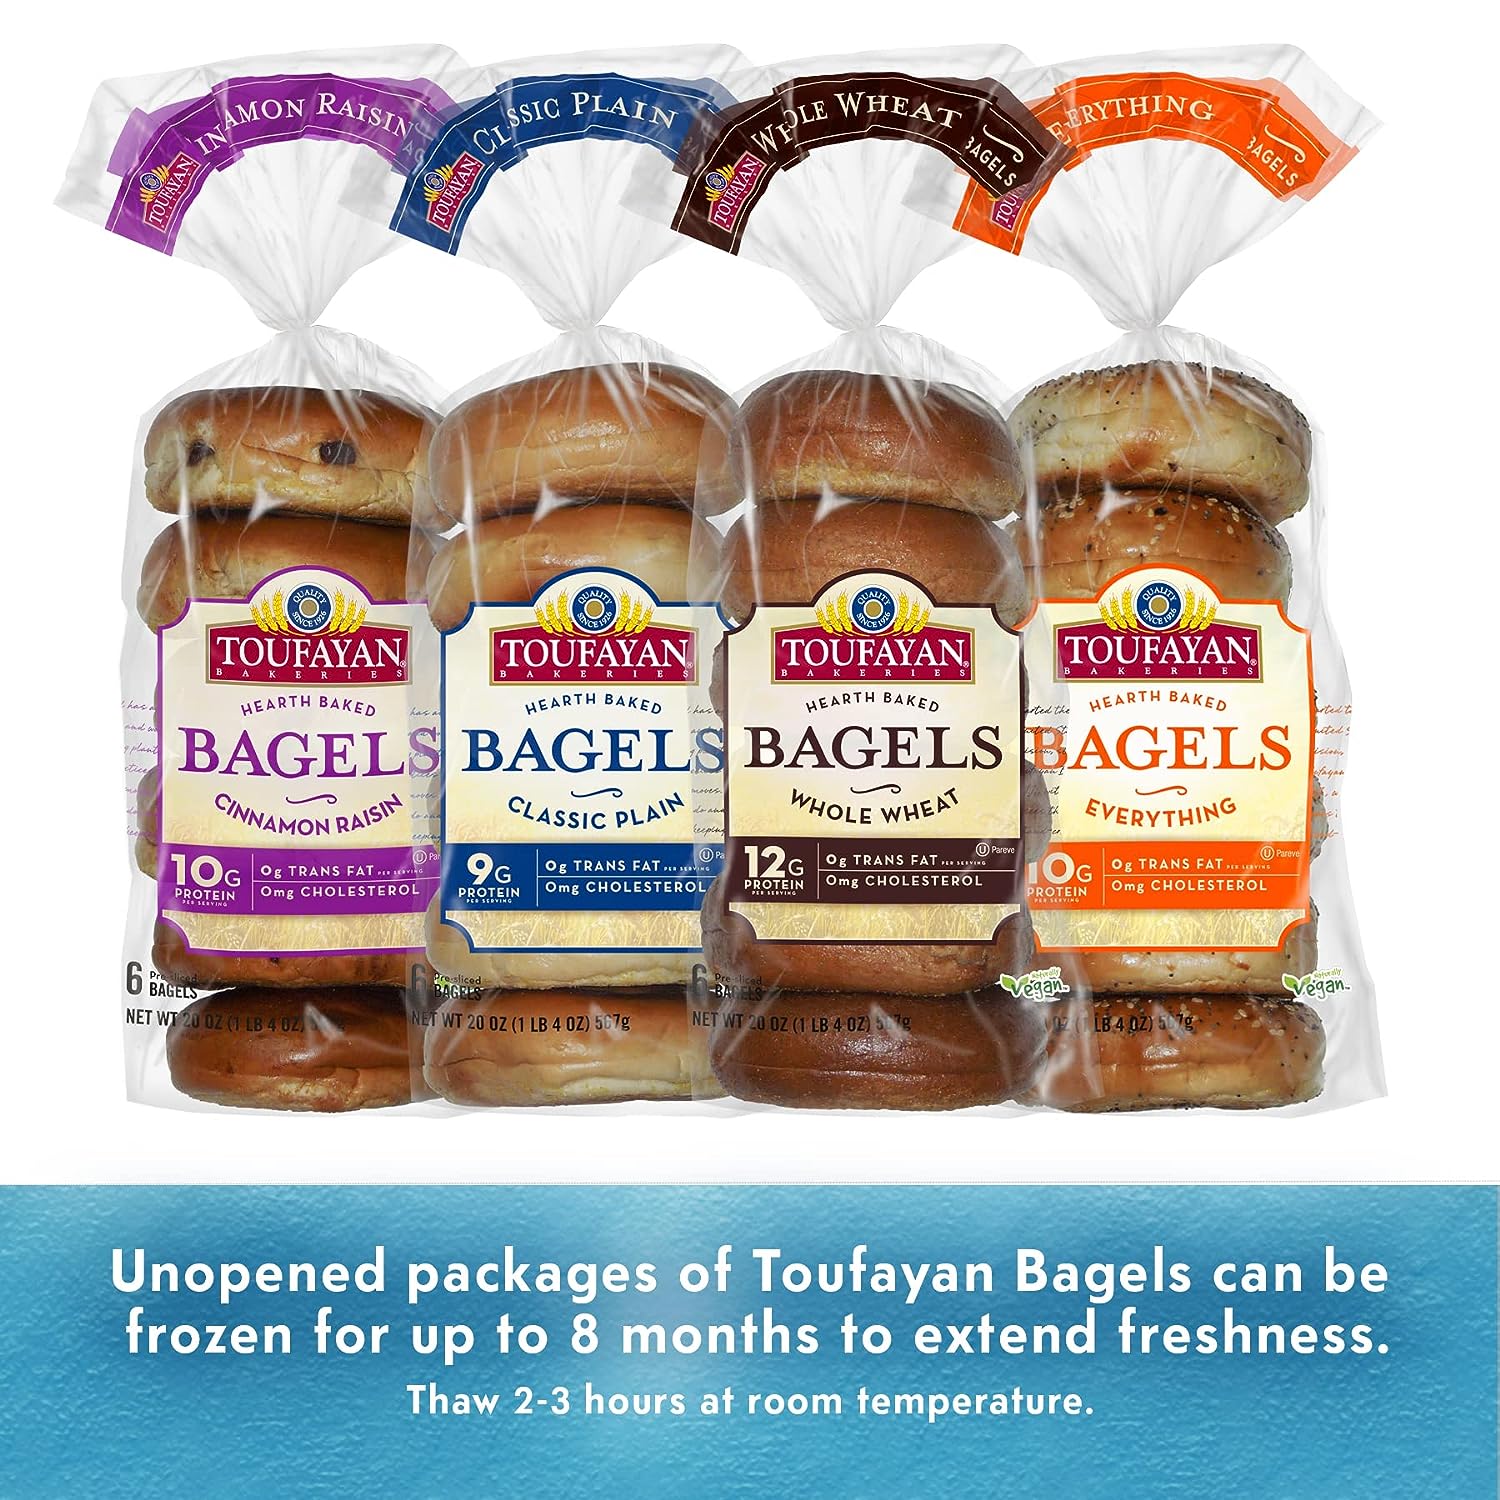 Unopened packages of Toufayan bagels can be frozen for up 8 months